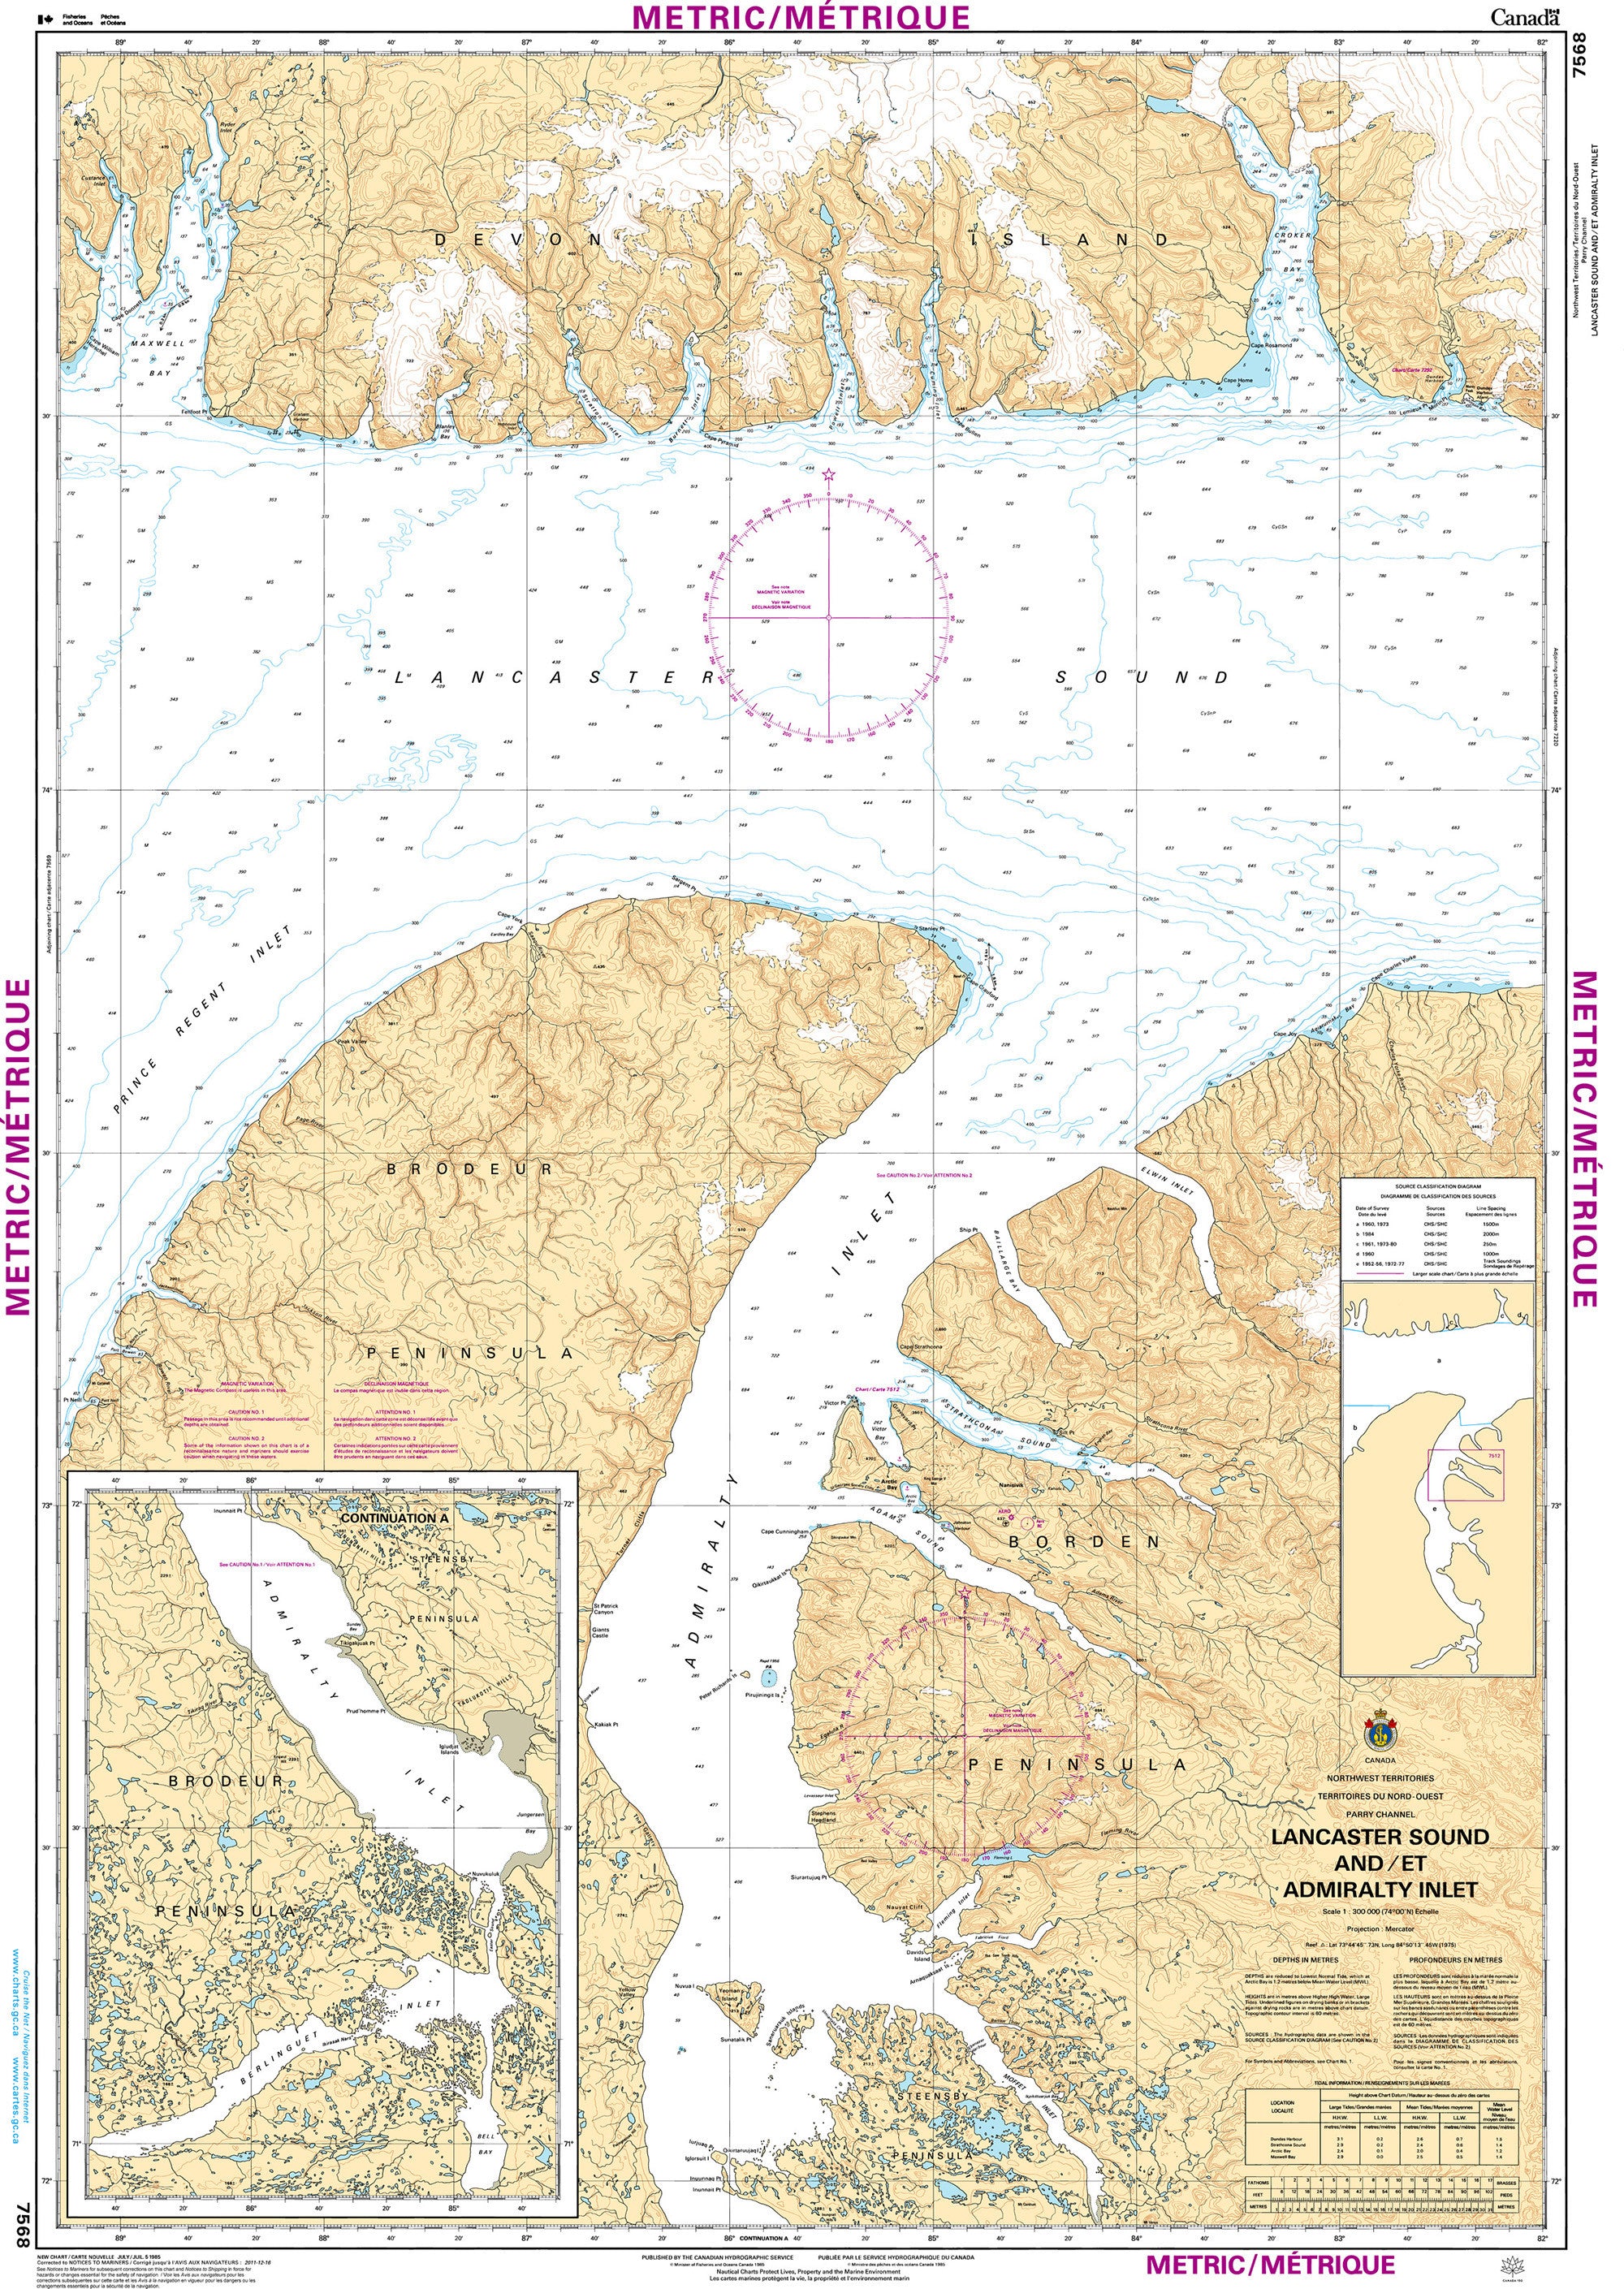 Canadian Hydrographic Service Nautical Chart CHS7568: Lancaster Sound and/et Admiralty Inlet